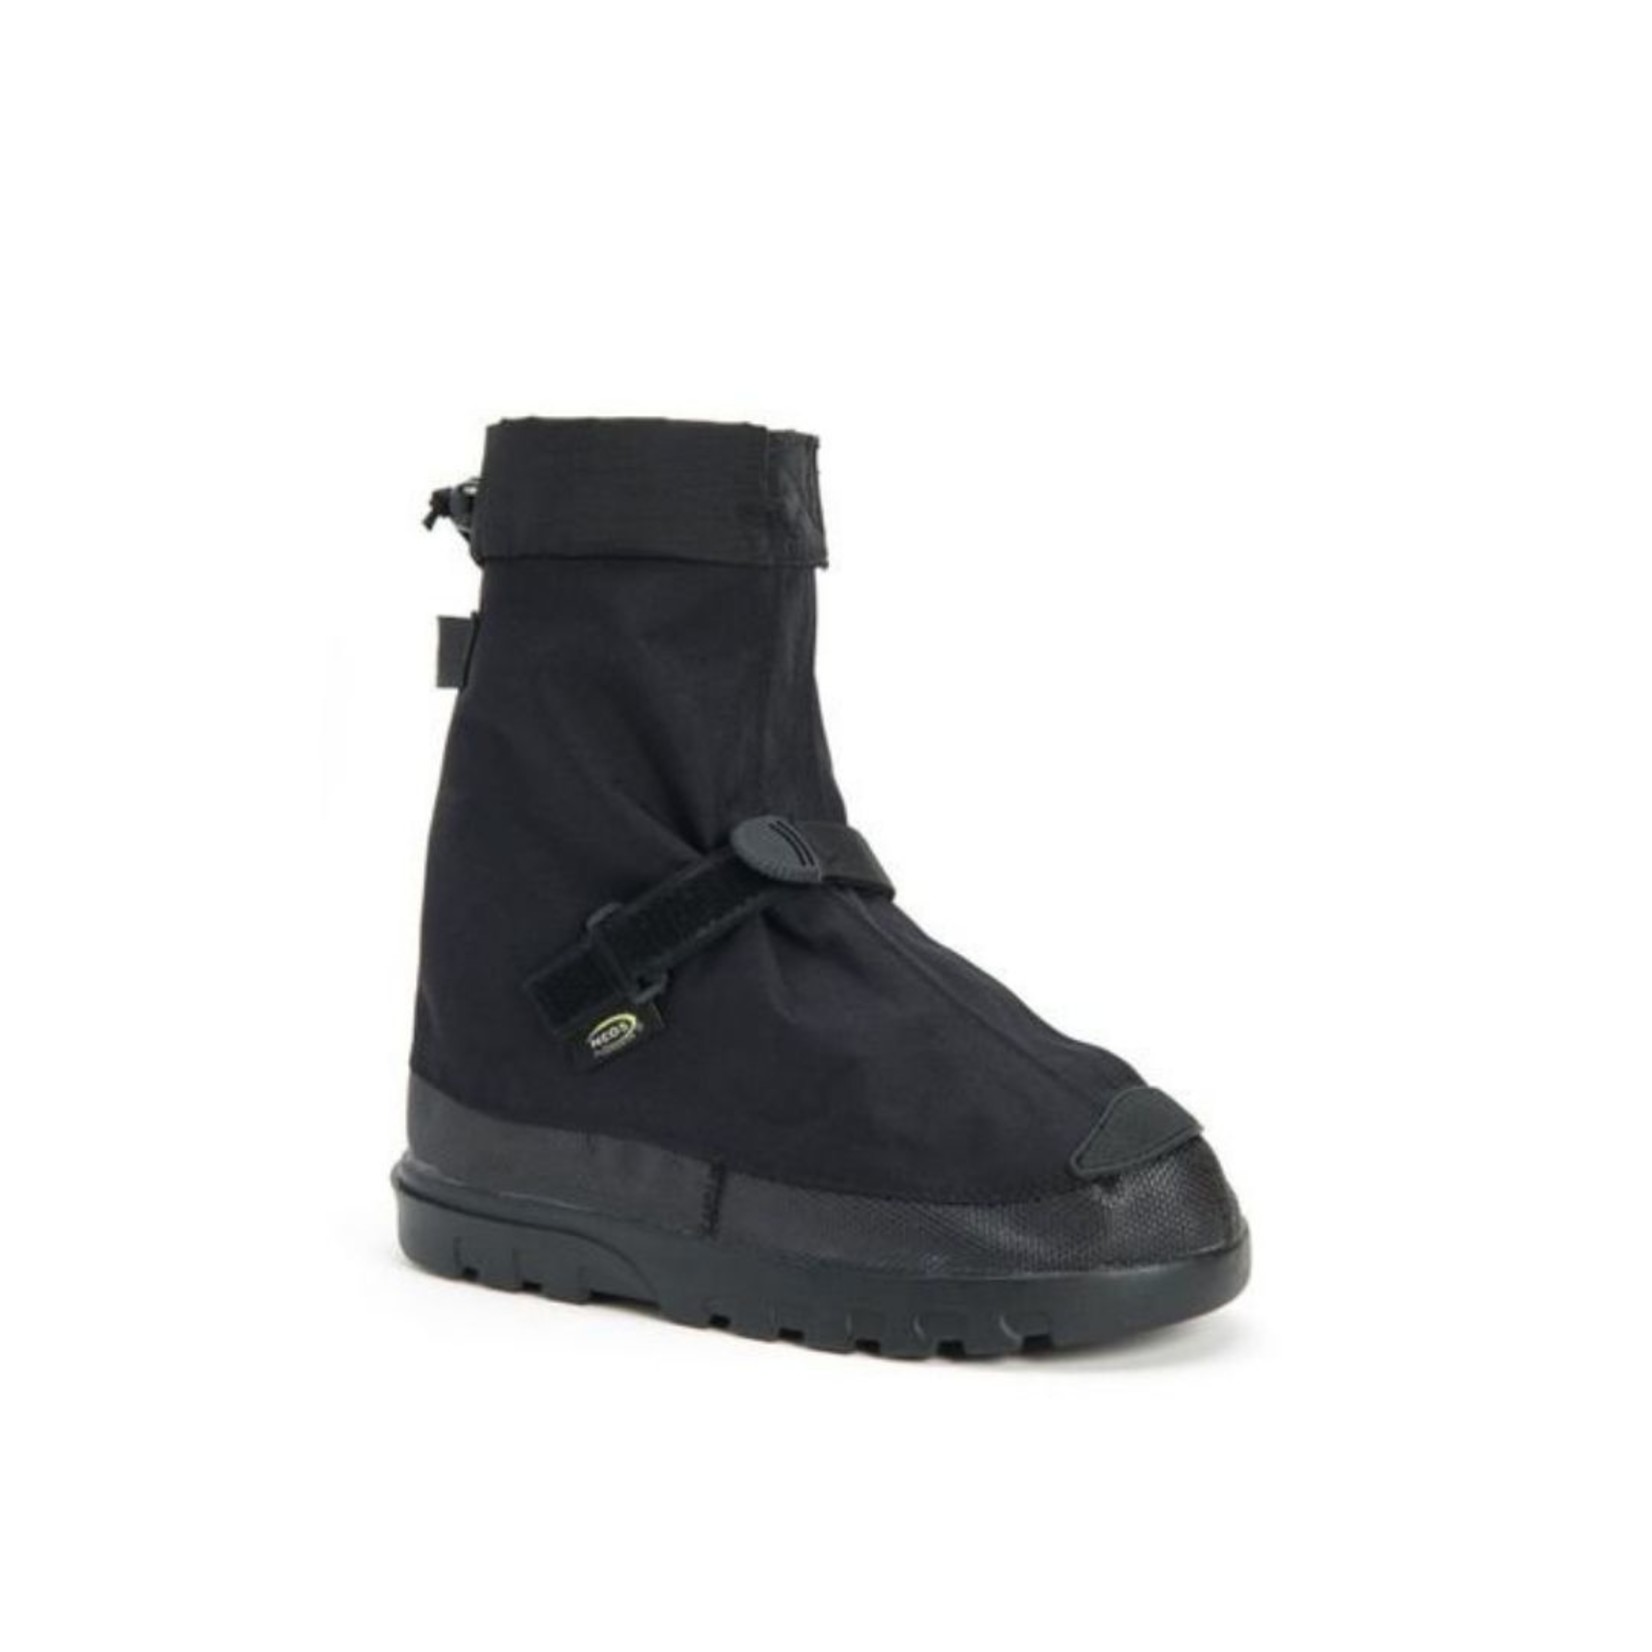 Neos Voyager Overshoe